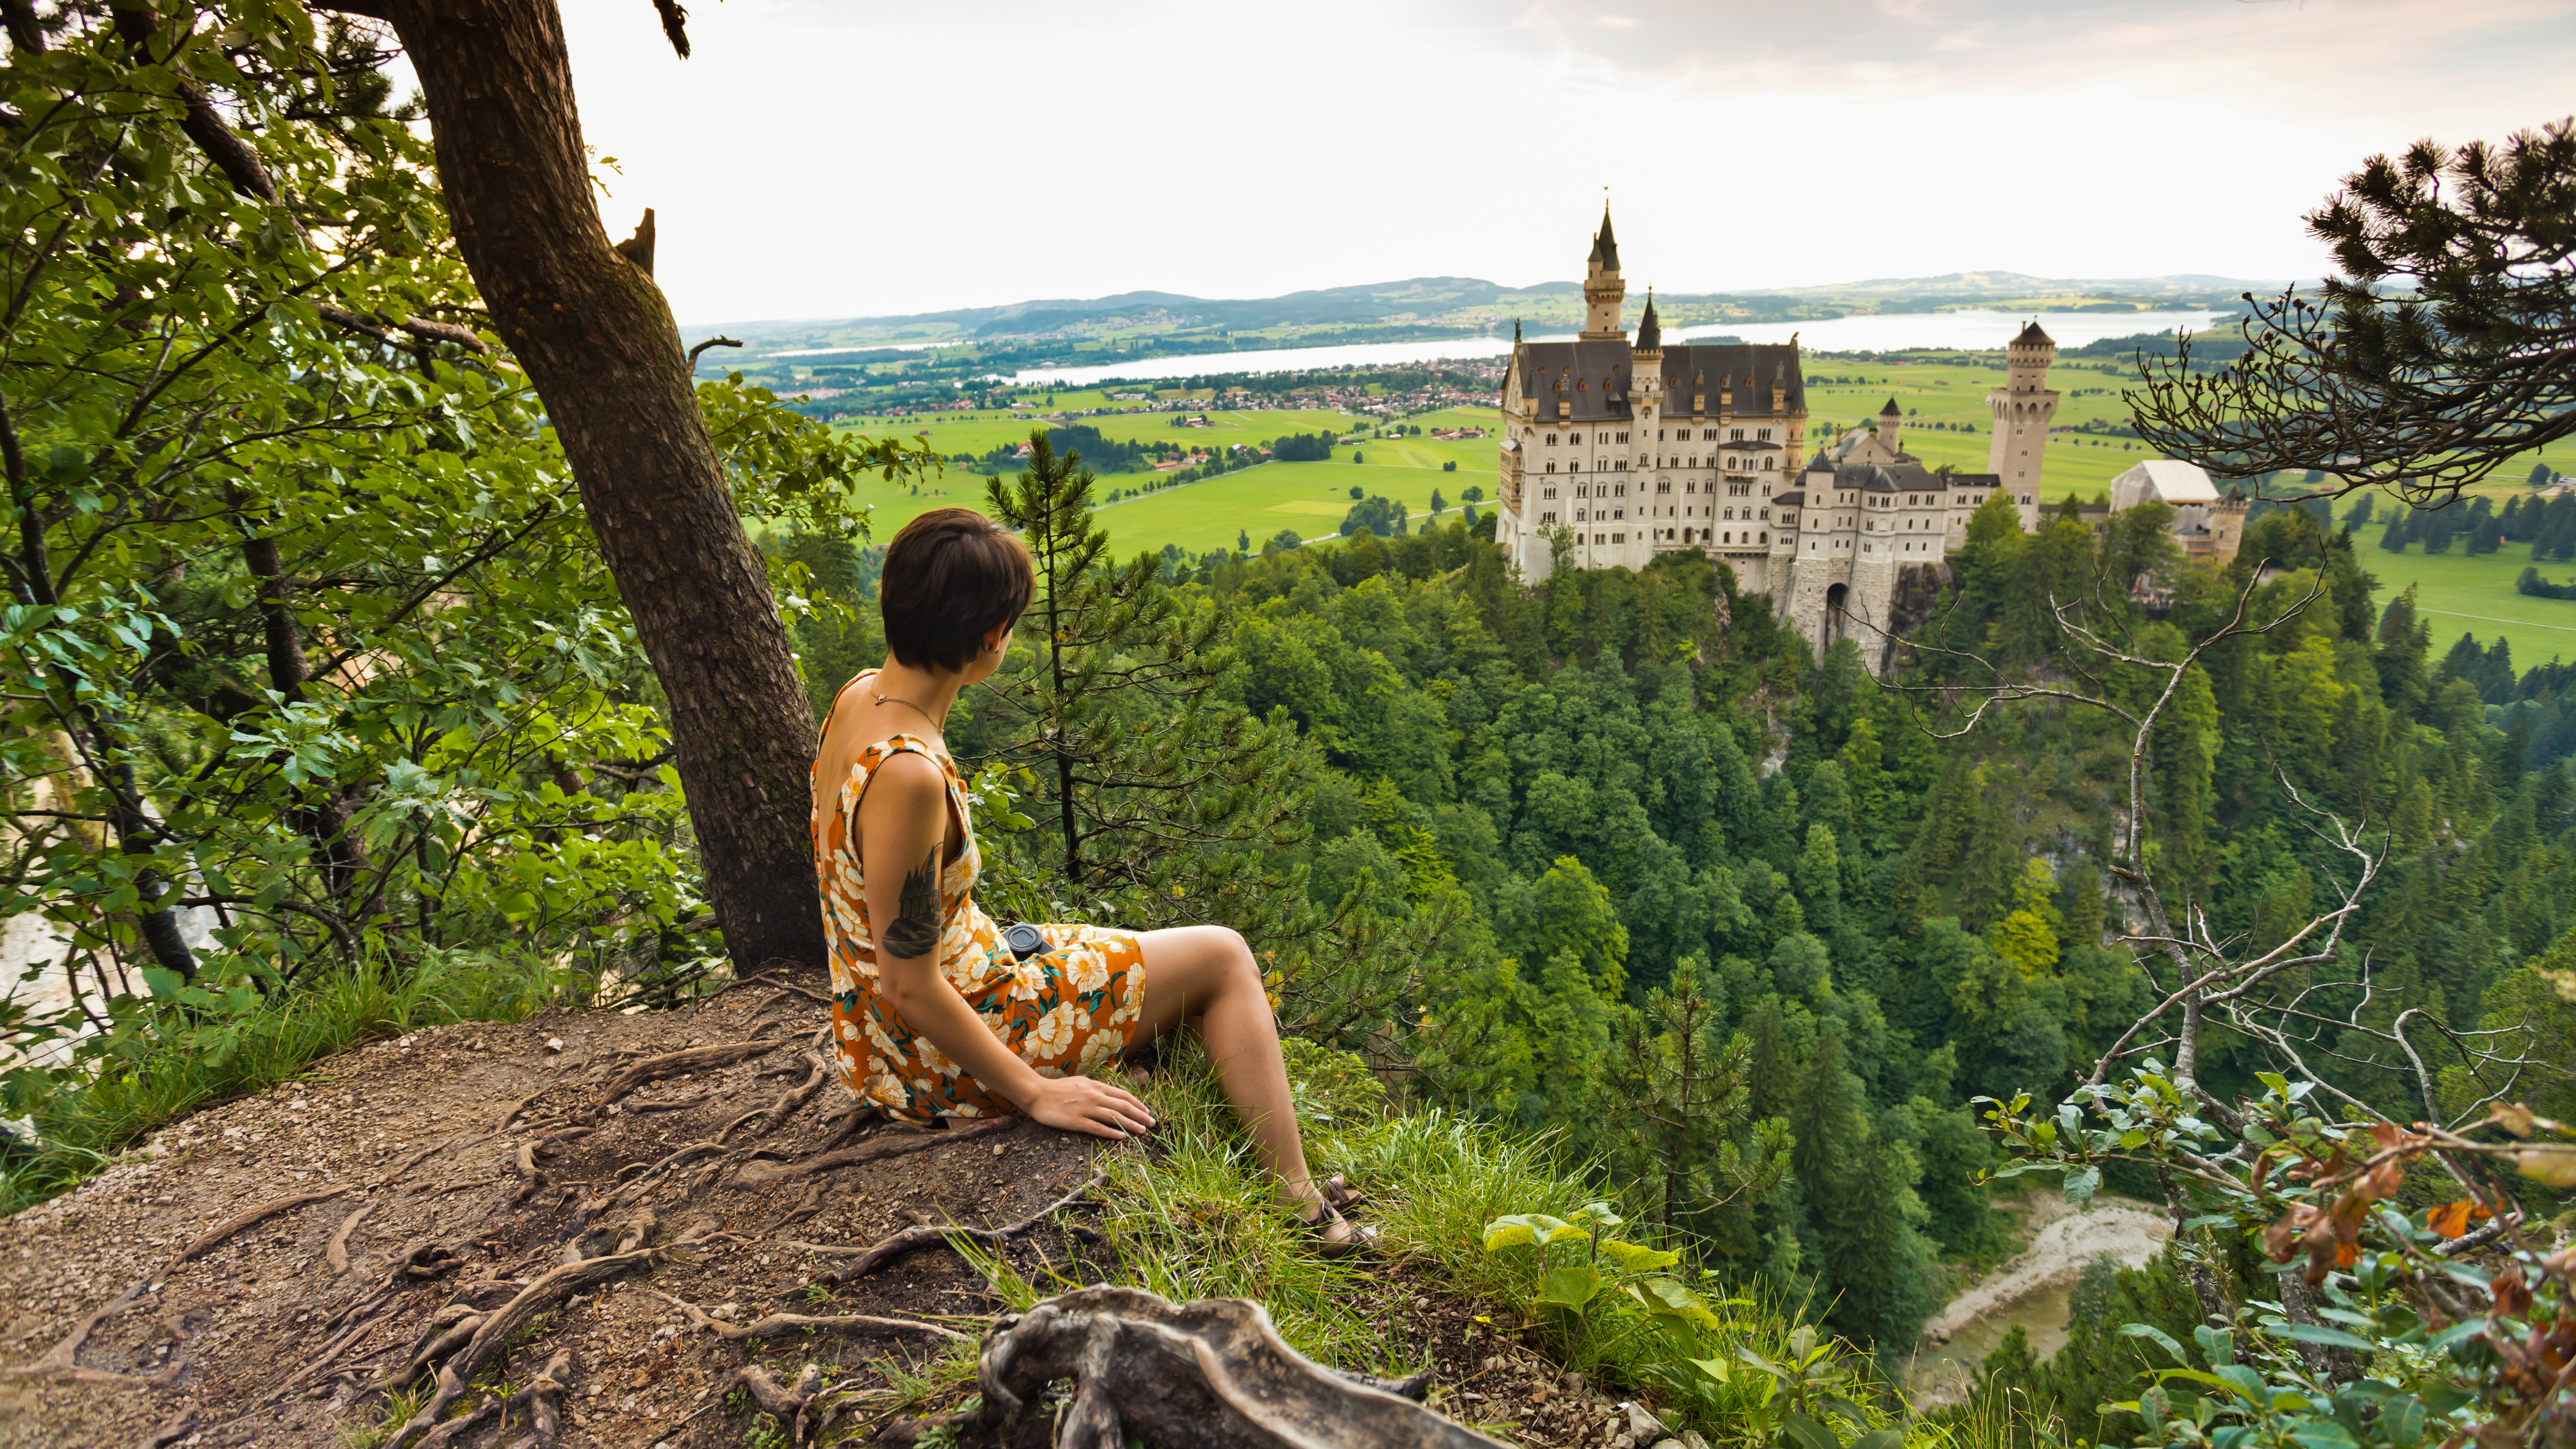 The Castles of Mad King Ludwig II by Rick Steves